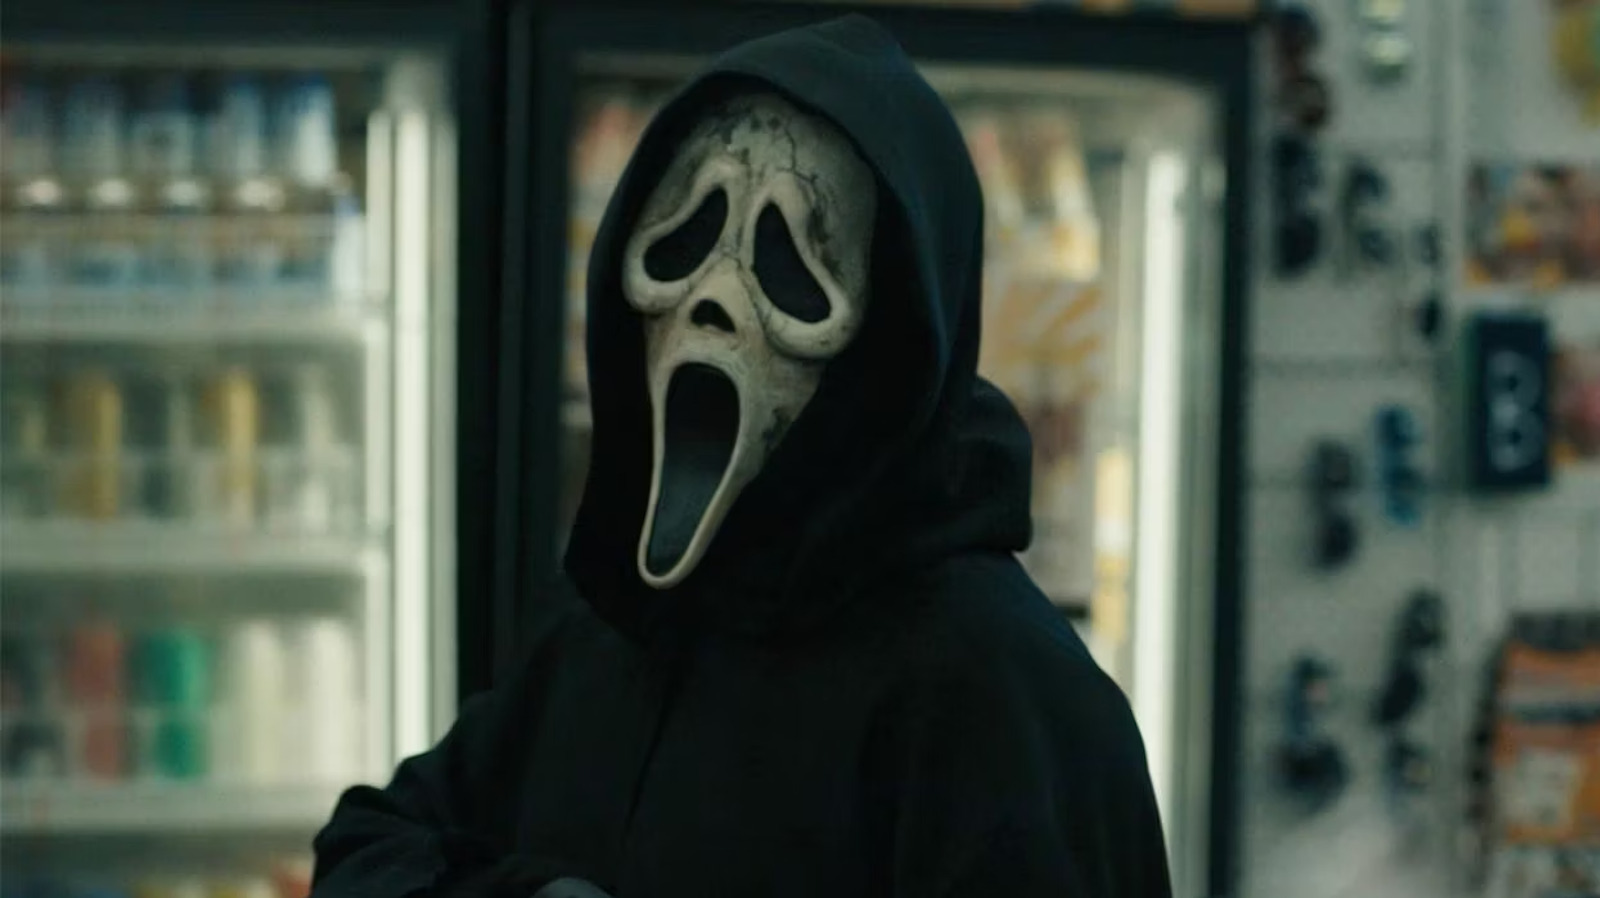 Scream 6's biggest flaw is that it doesn't follow its own rules